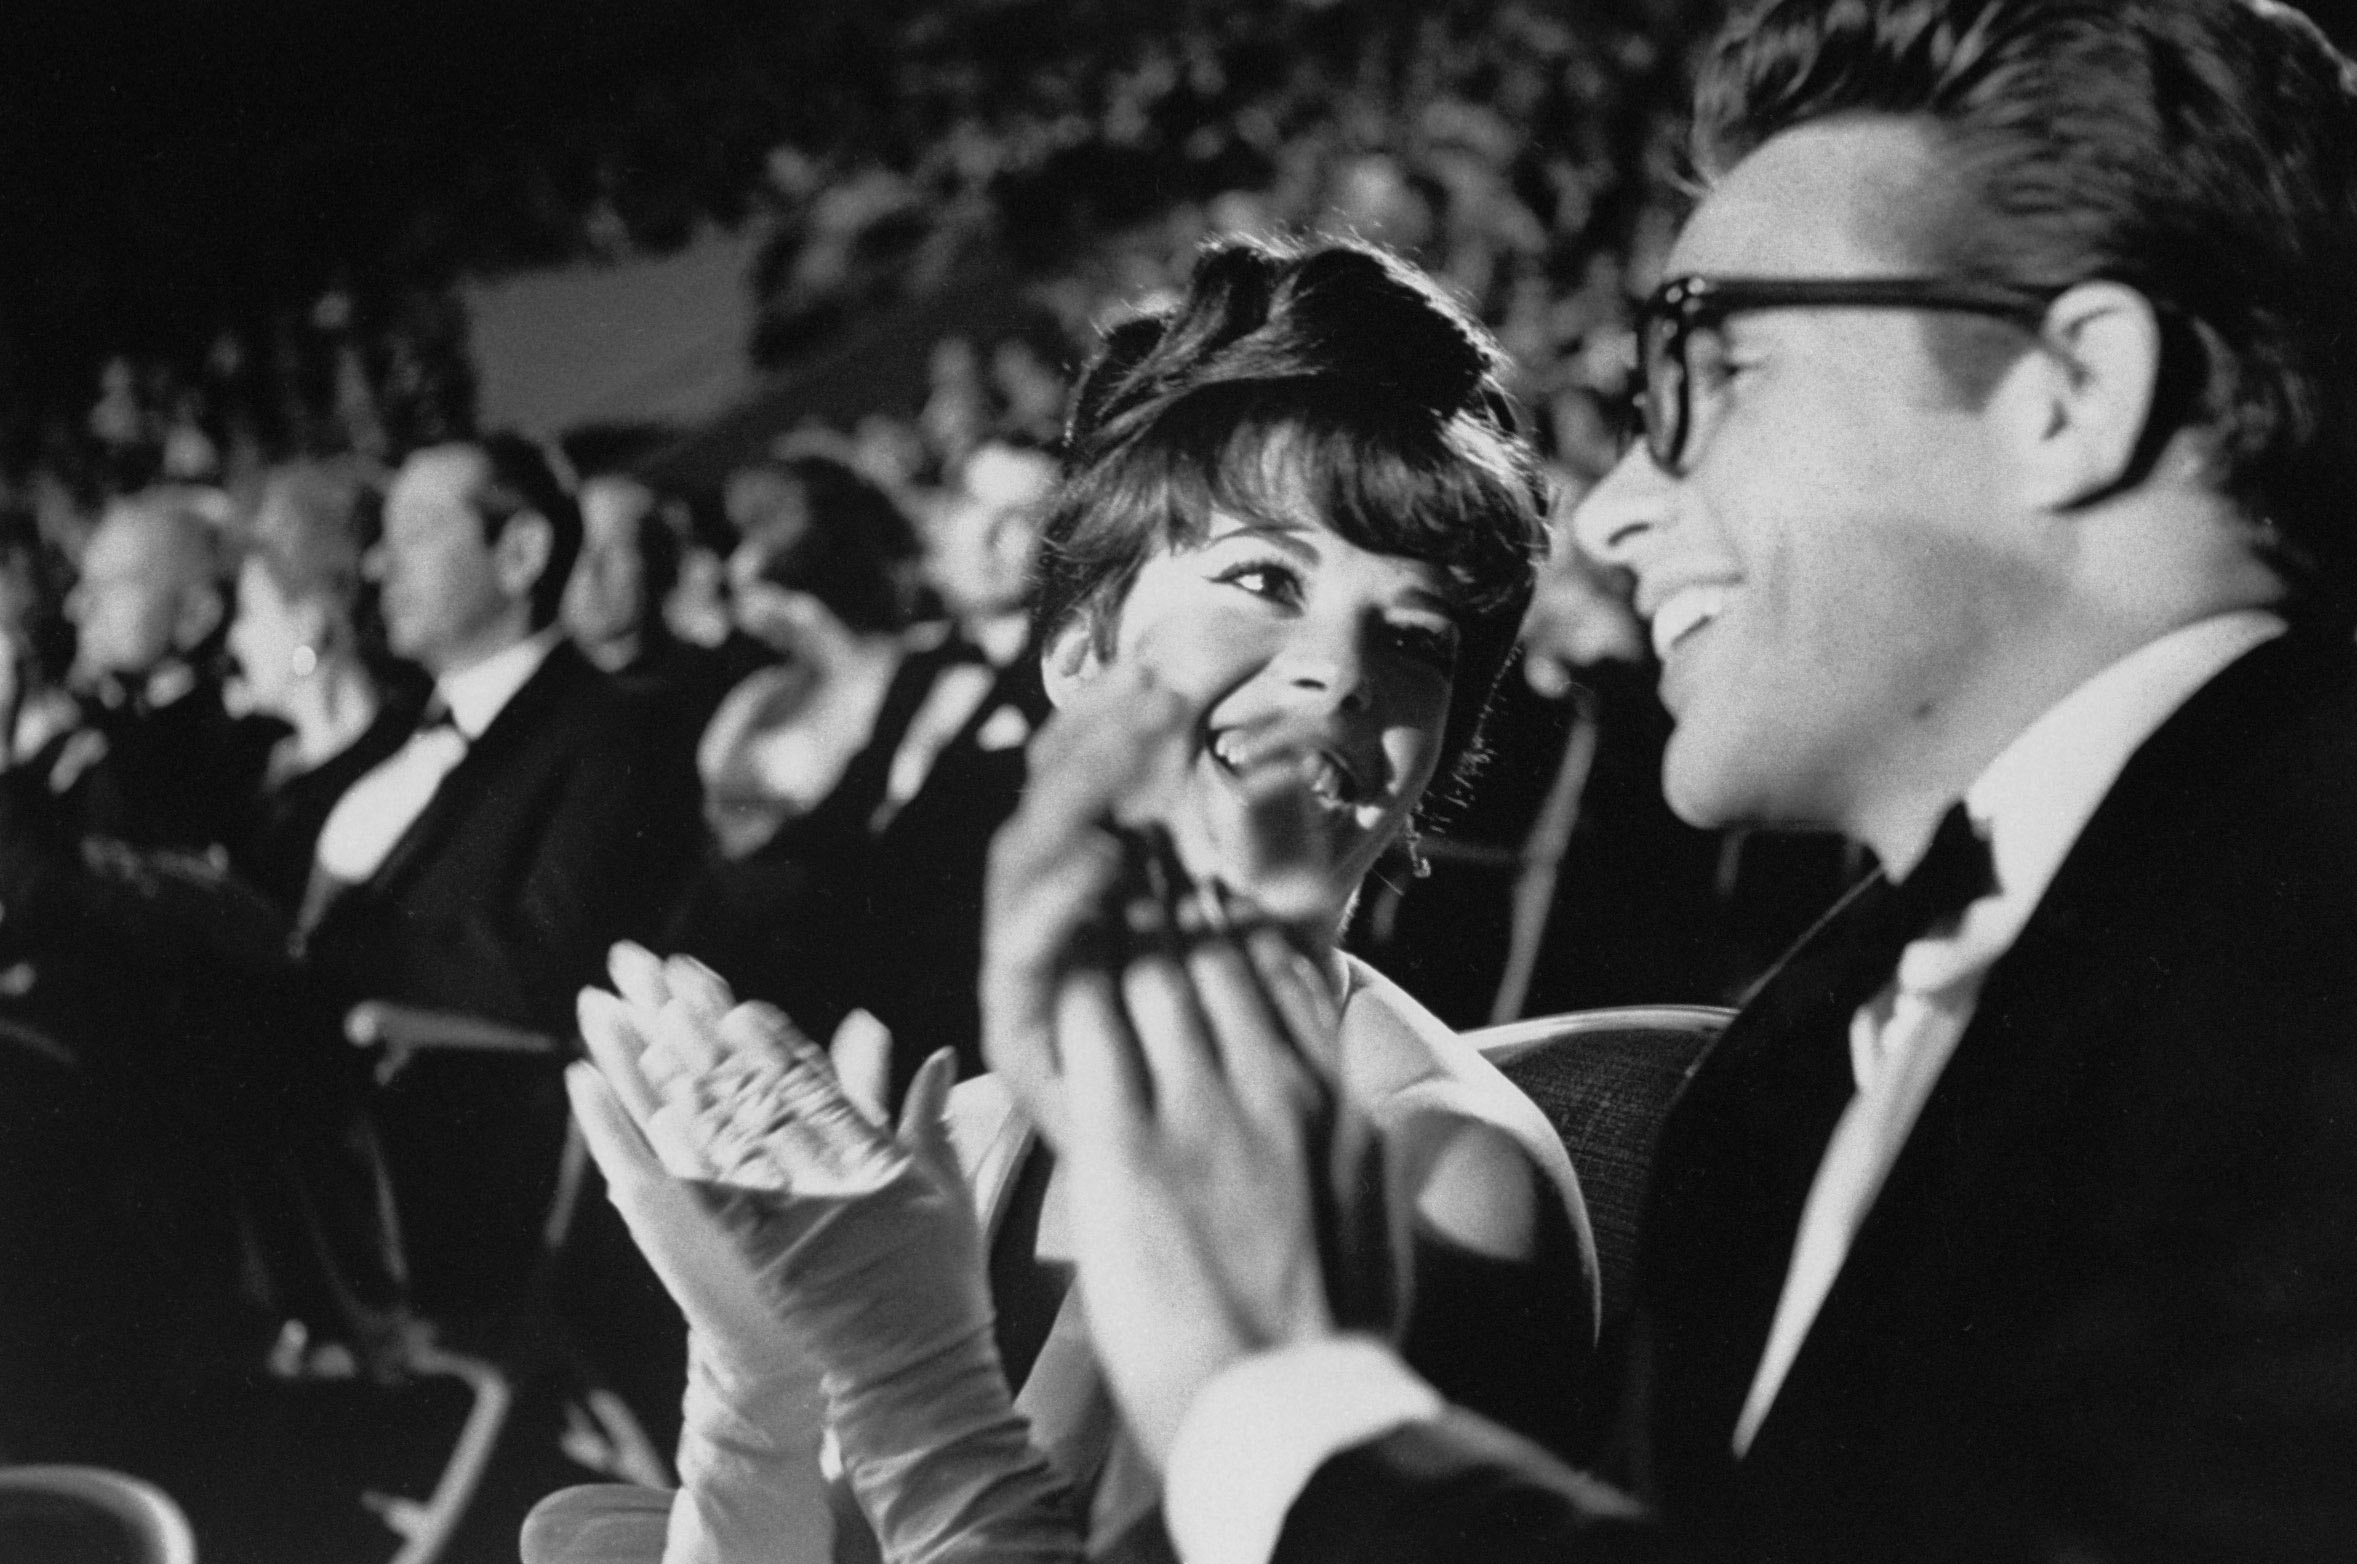 Warren Beatty with Natalie Wood at the 1962 Academy Awards ceremony at the Santa Monica Civic Auditorium.